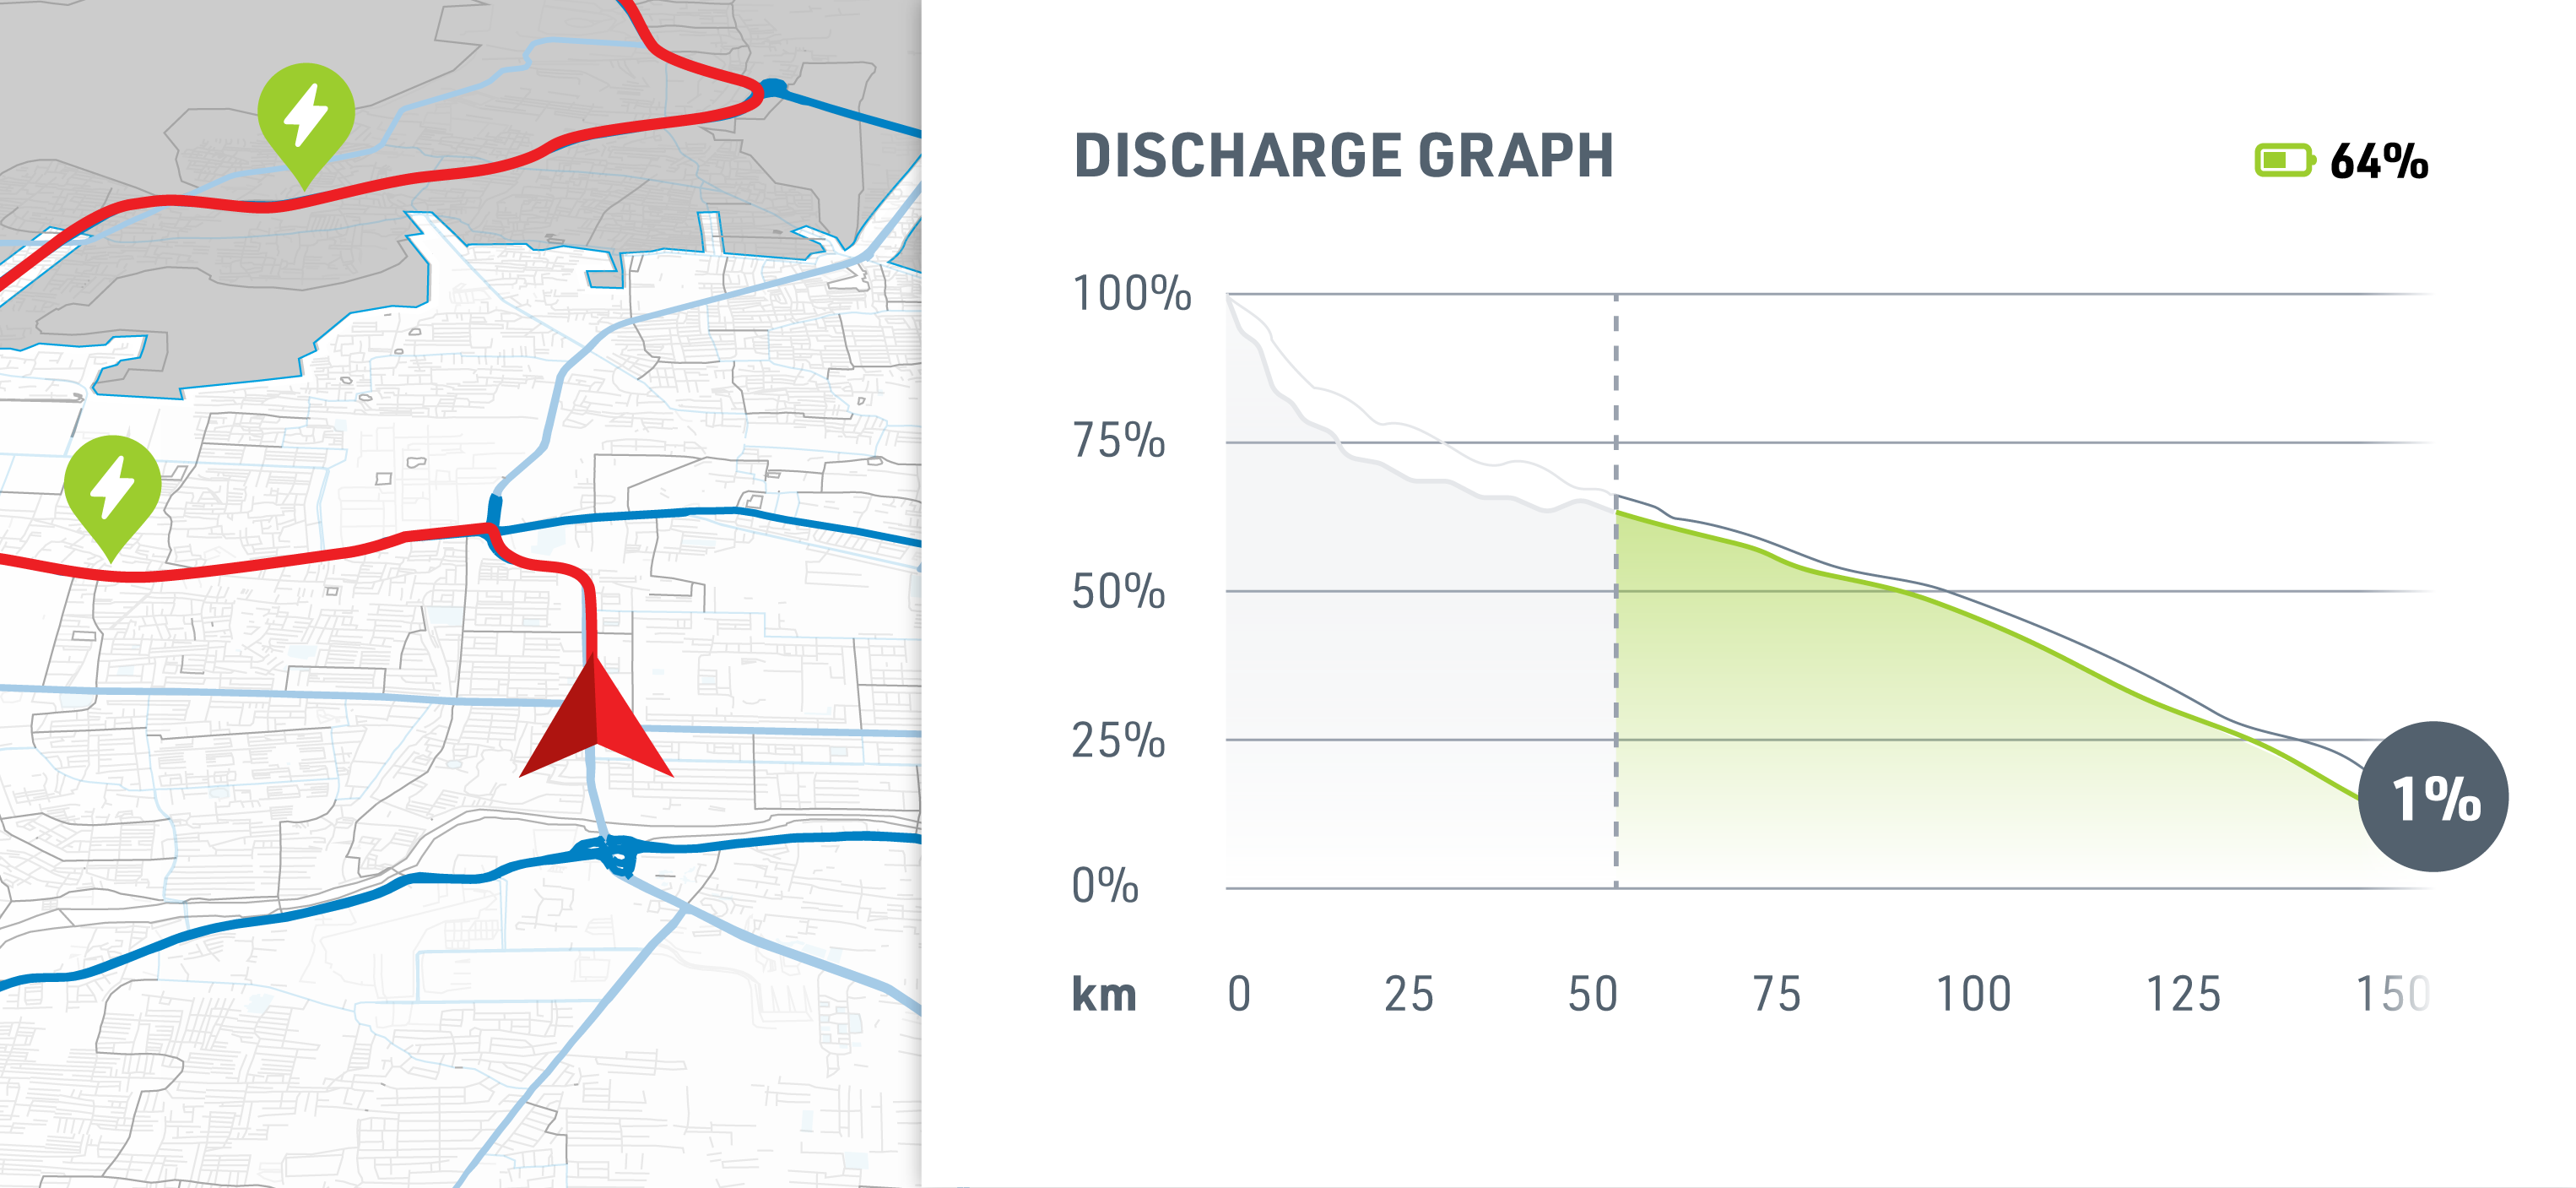 Electric vehicle discharge graph along the route